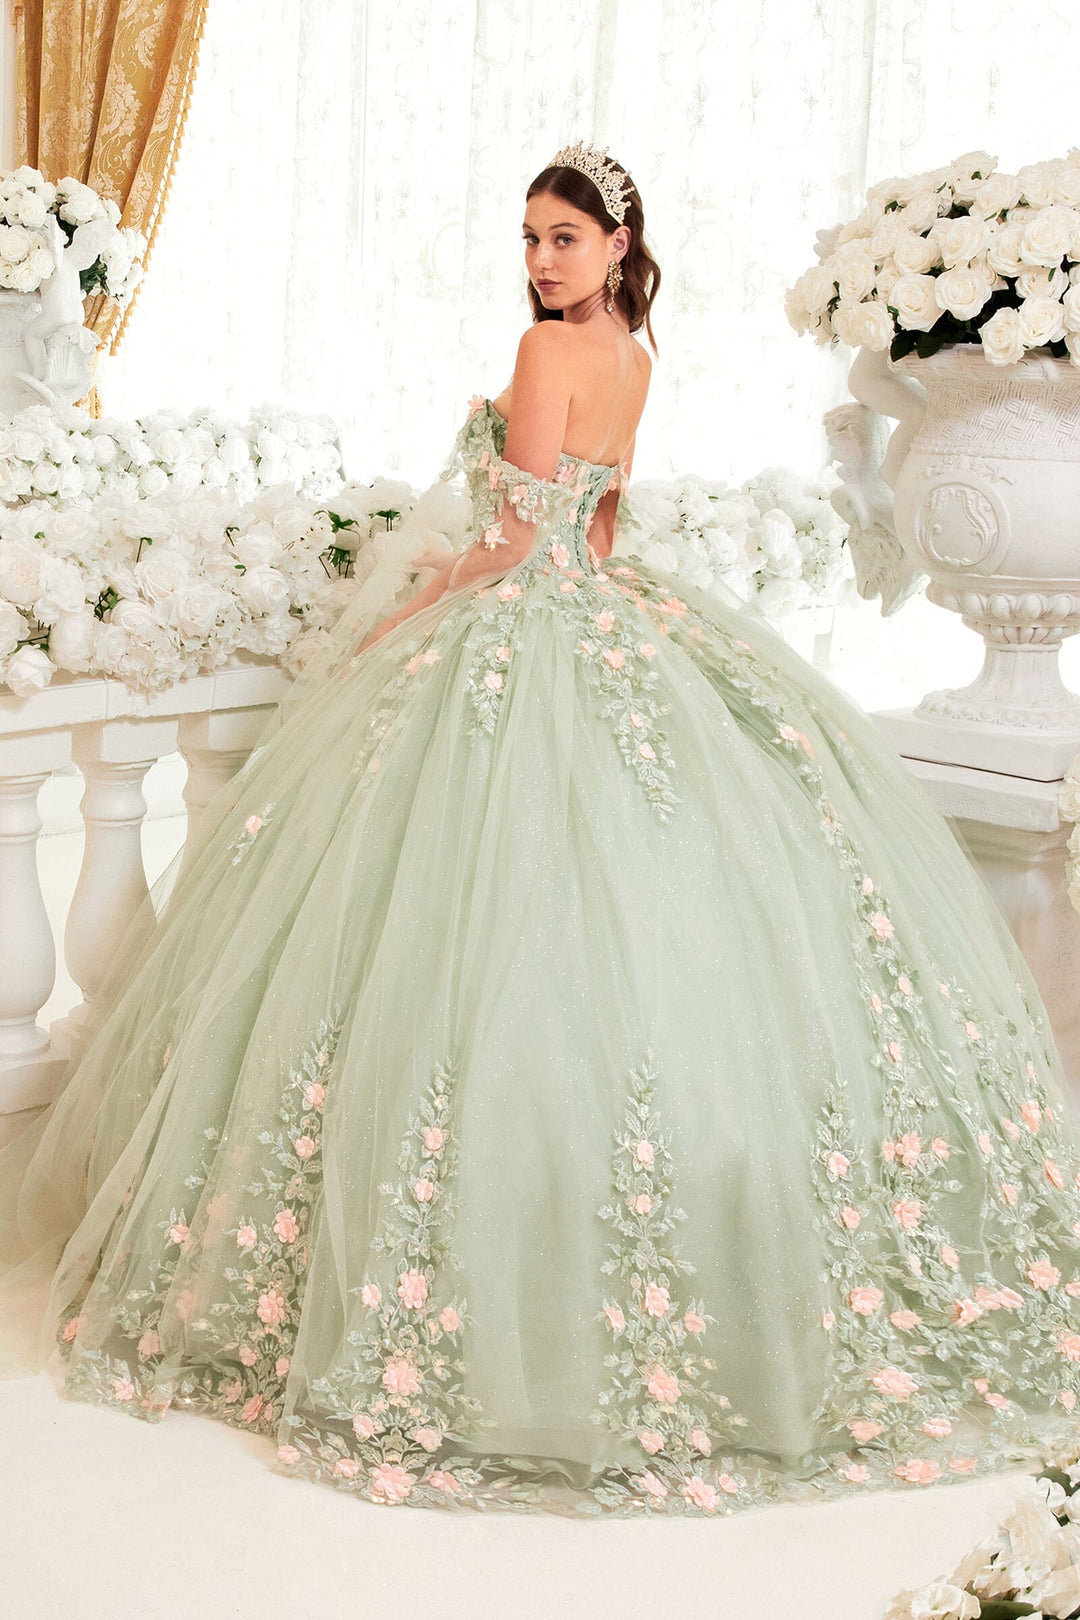 Floral Applique Cape Sleeve Ball Gown by Ladivine 15716